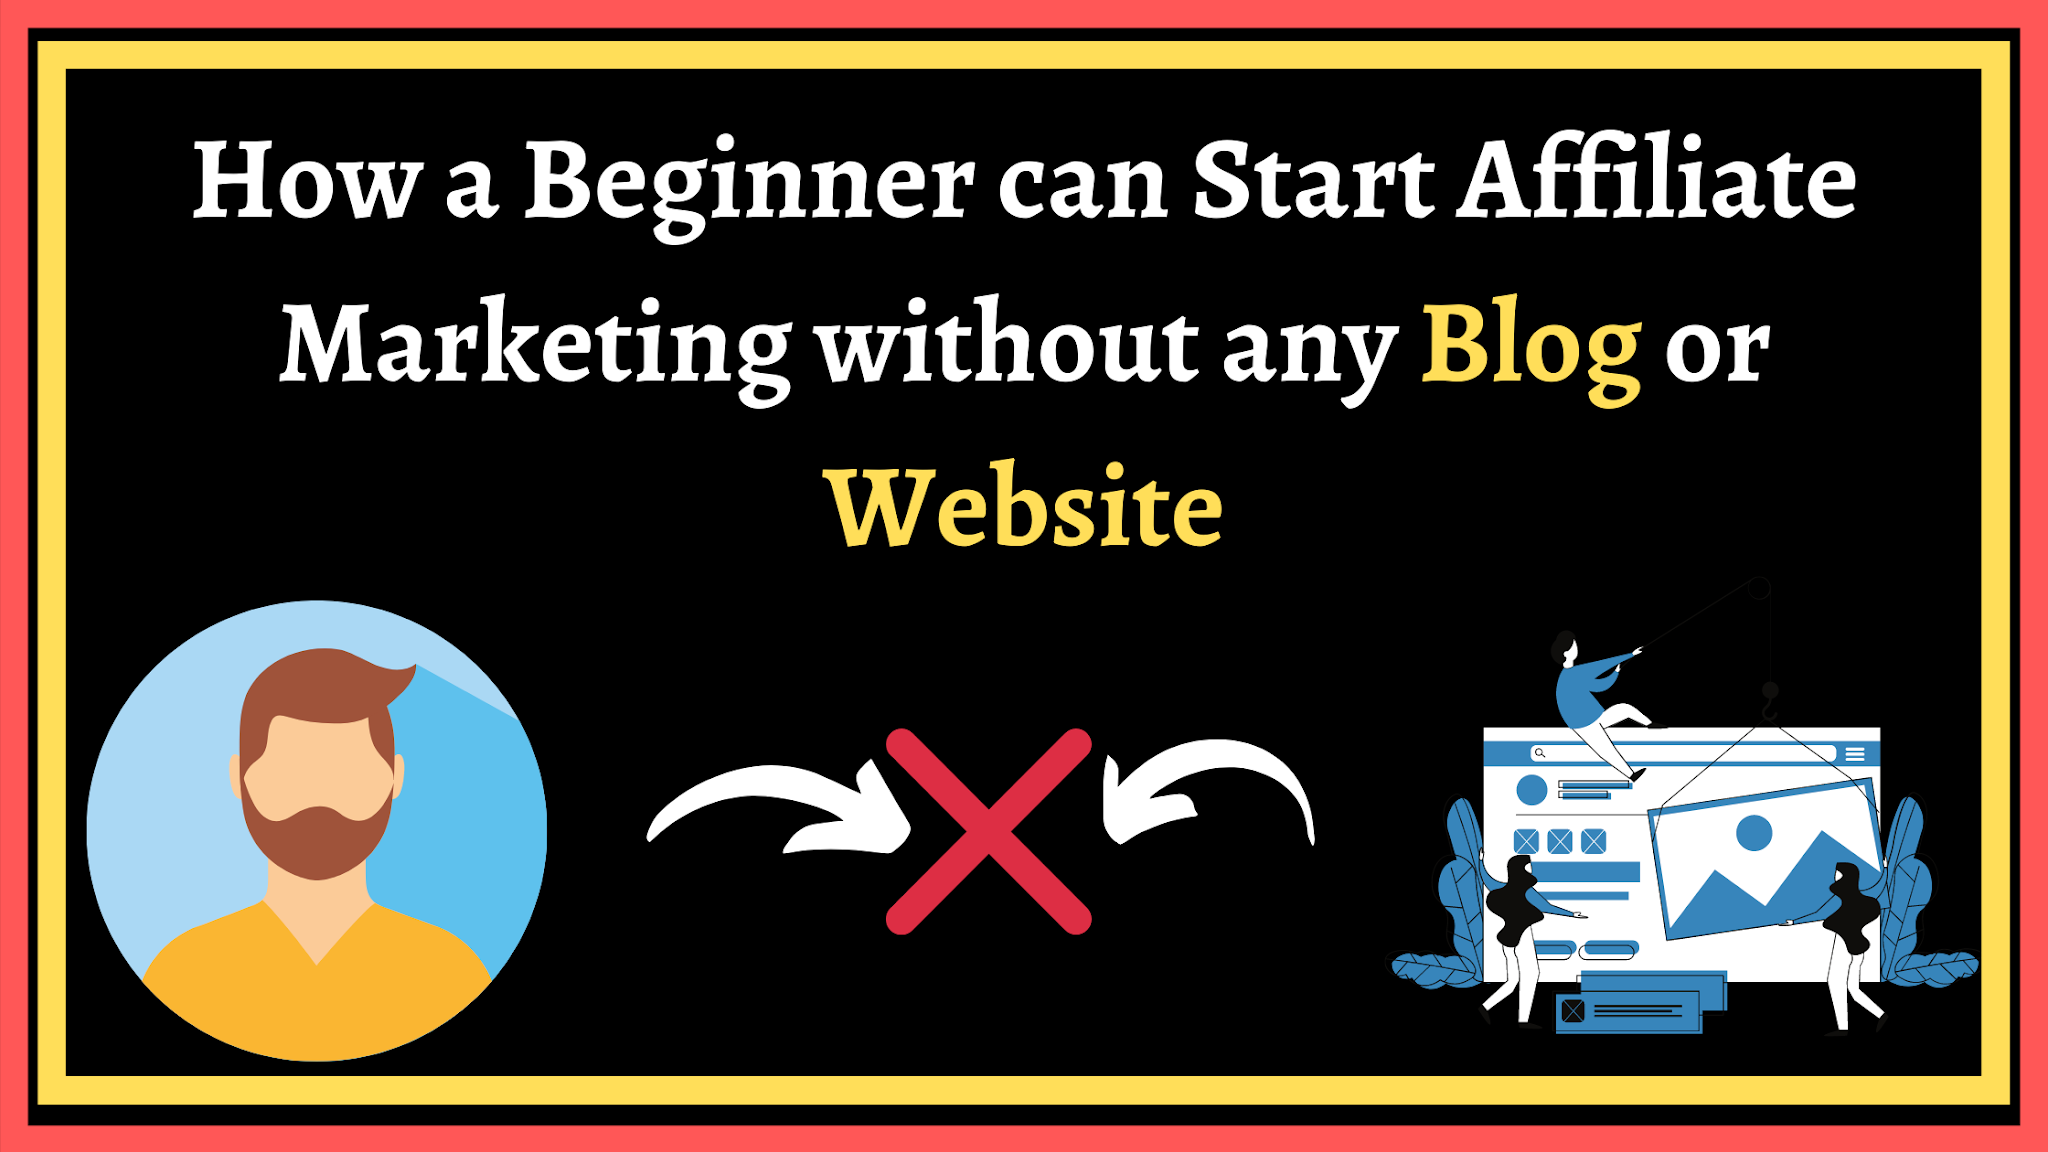 How a Beginner can Start Affiliate Marketing without any Blog or Website 2020